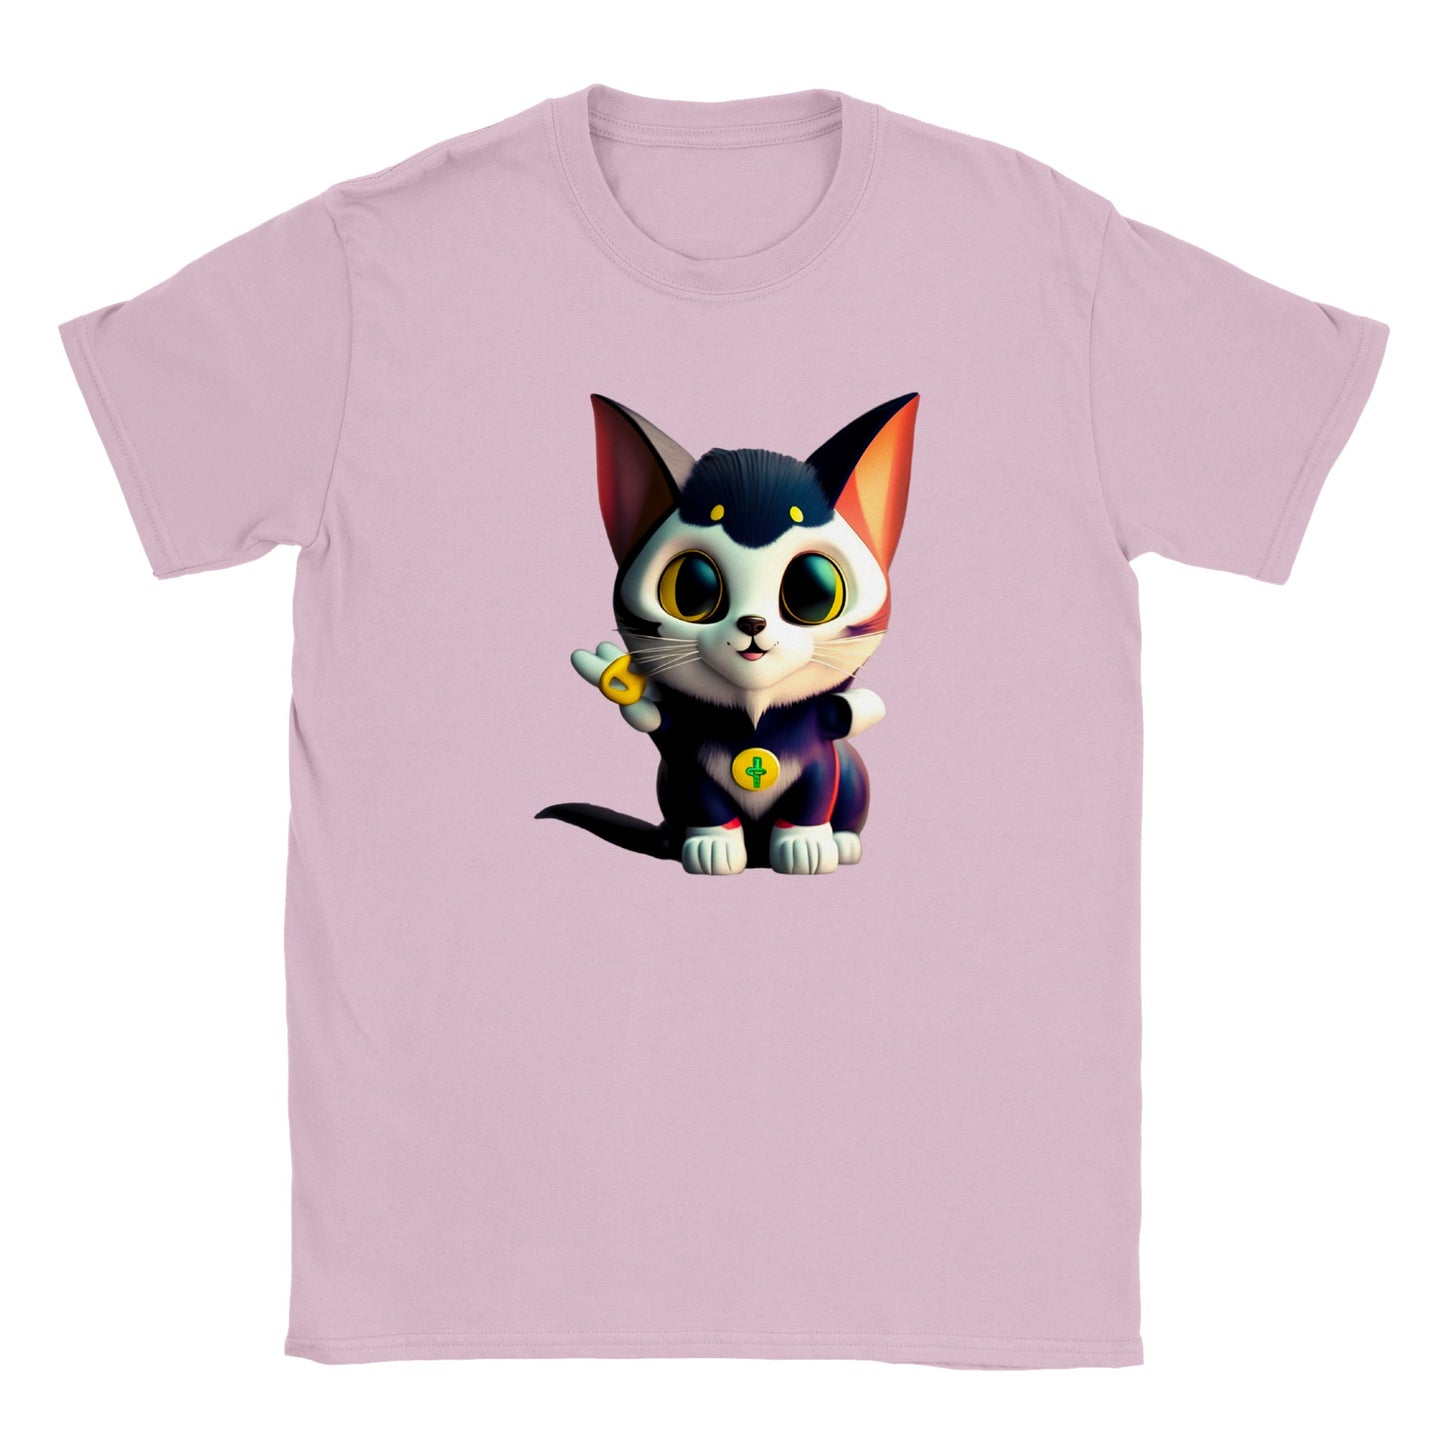 Adorable, Cool, Cute Cats and Kittens Toy - Classic Kids Crewneck T-Shirt 54